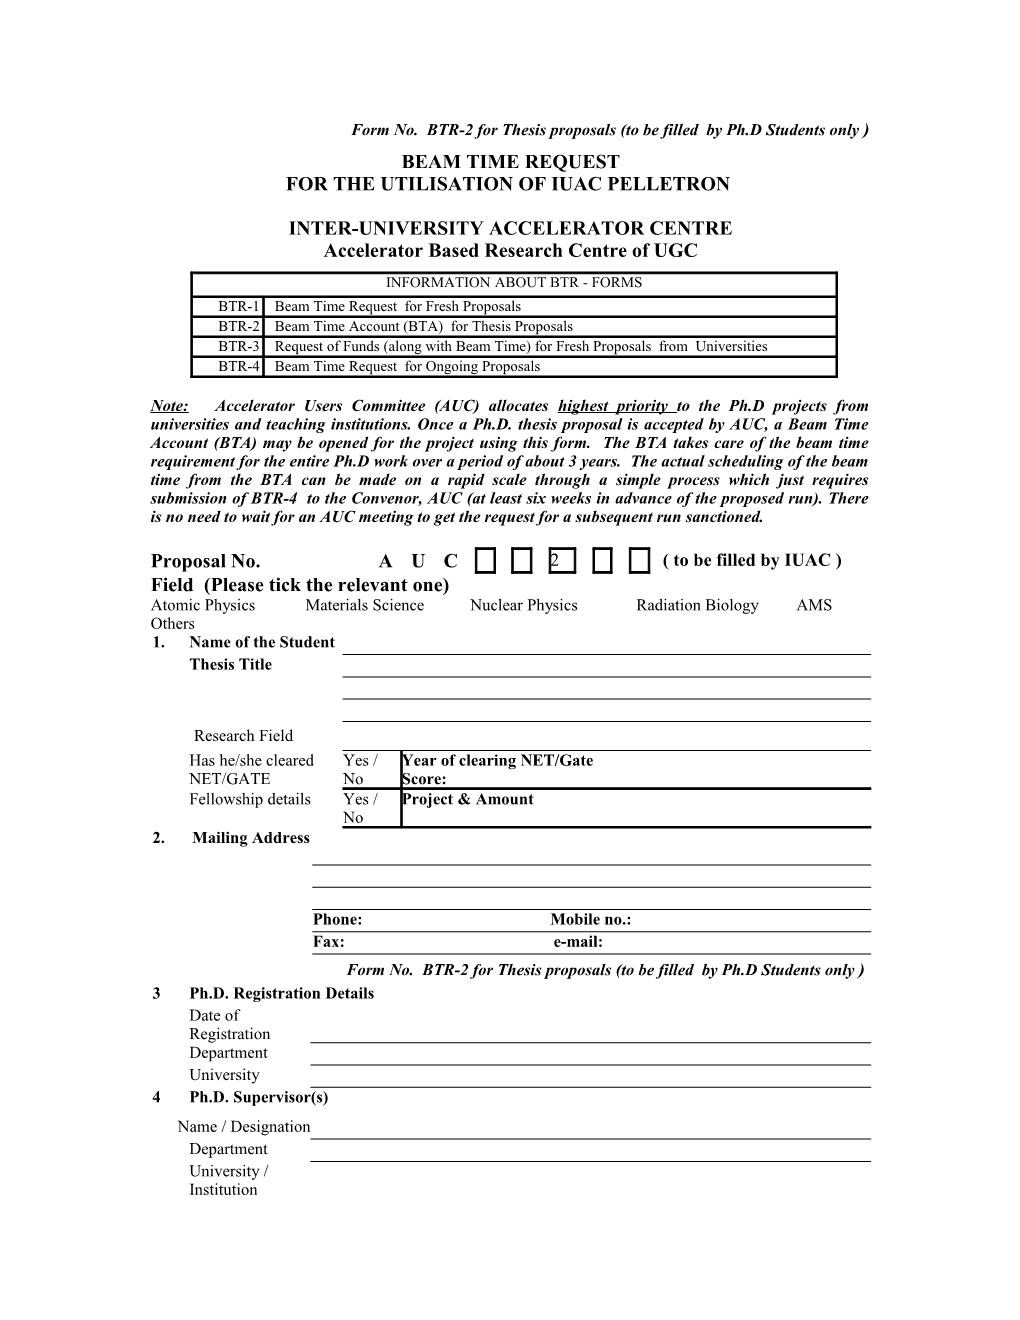 Form No. BTR-2 for Thesis Proposals (To Be Filled by Ph.D Students Only )